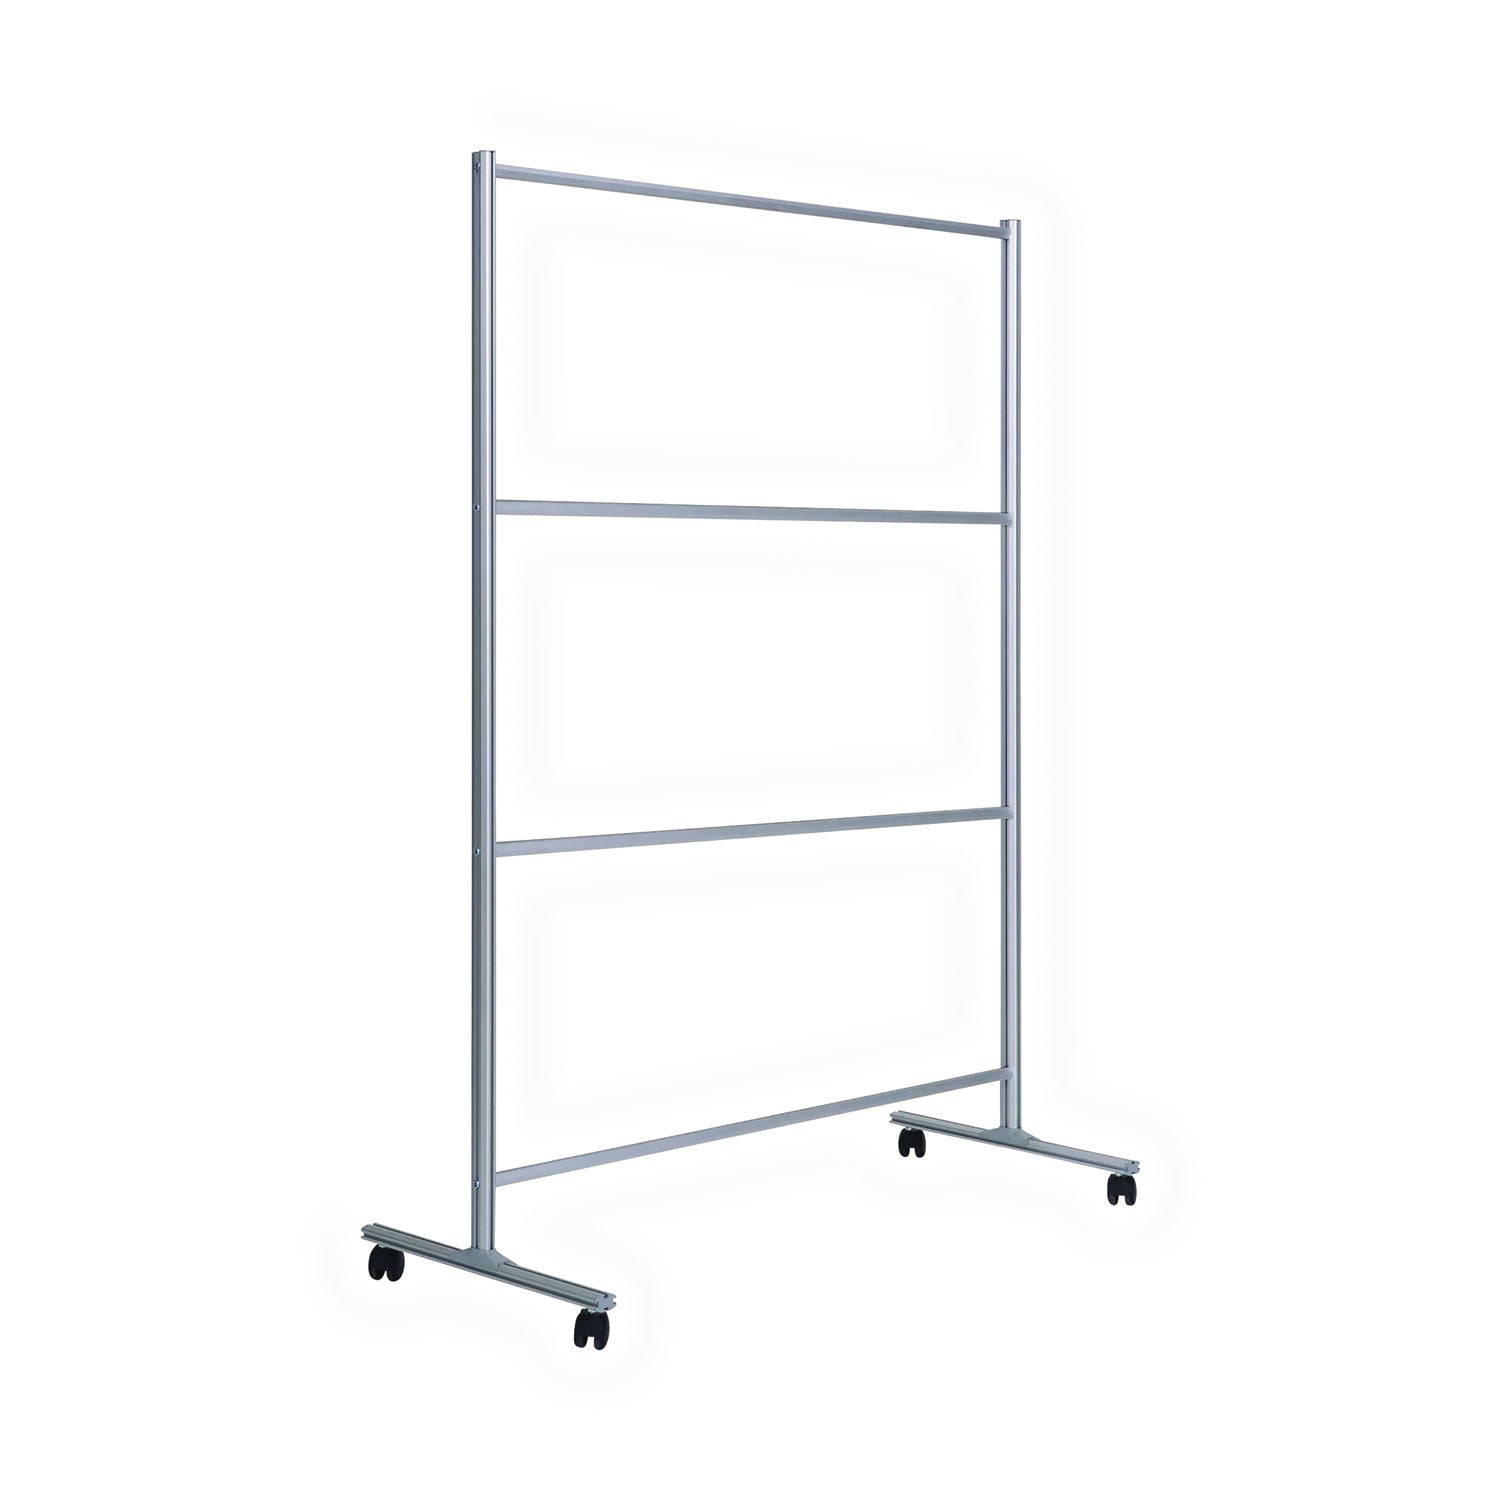 protector-series-mobile-glass-panel-divider-49-x-22-x-69-clear-aluminum_bvcdsp123046 - 2